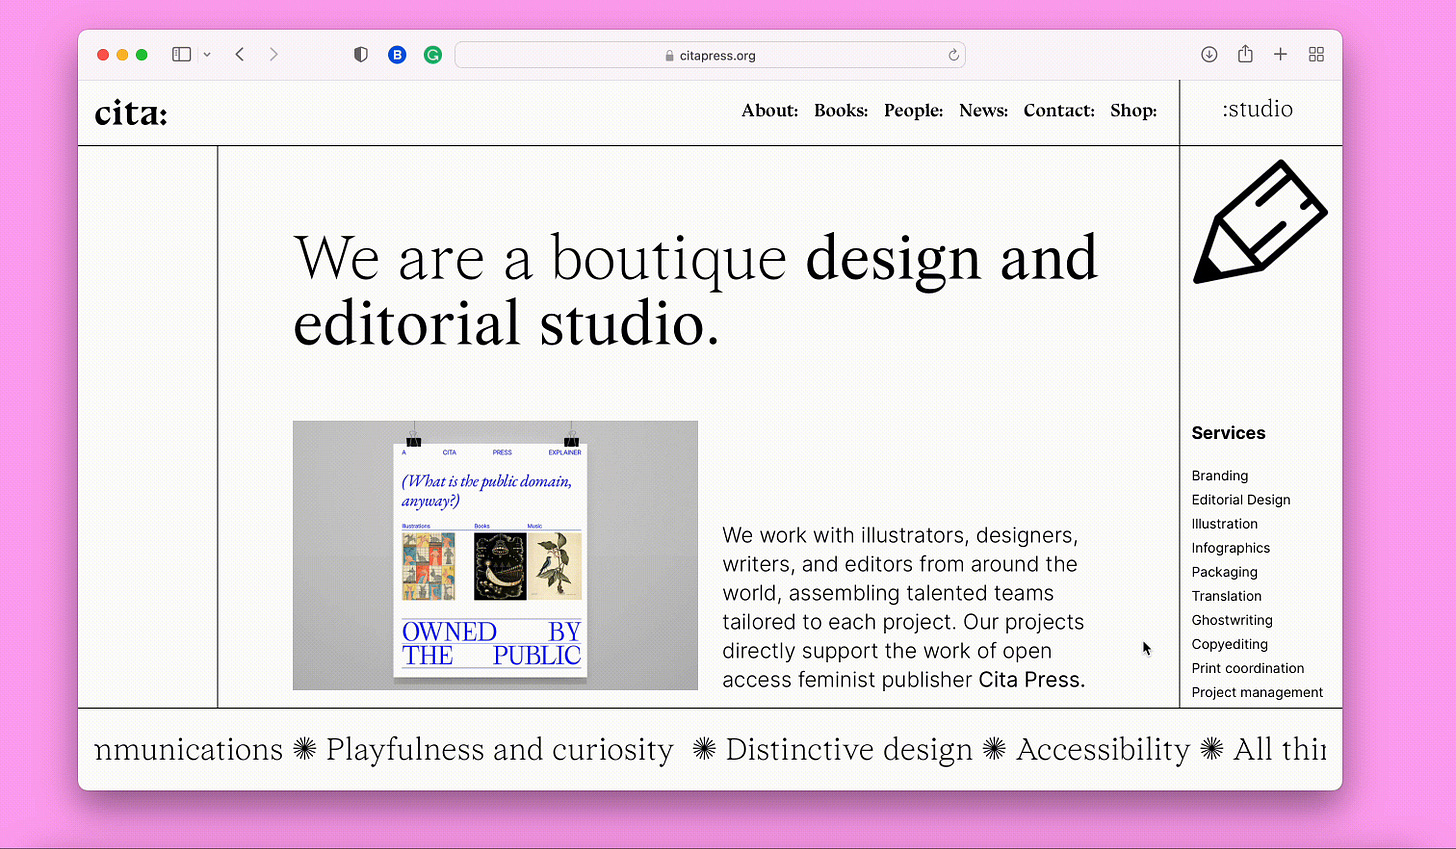 We are a boutique design and editorial studio. We work with illustrators, designers, writers, and editors from around the world, assembling talented teams tailored to each project. Our projects directly support the work of open access feminist publisher Cita Press. 